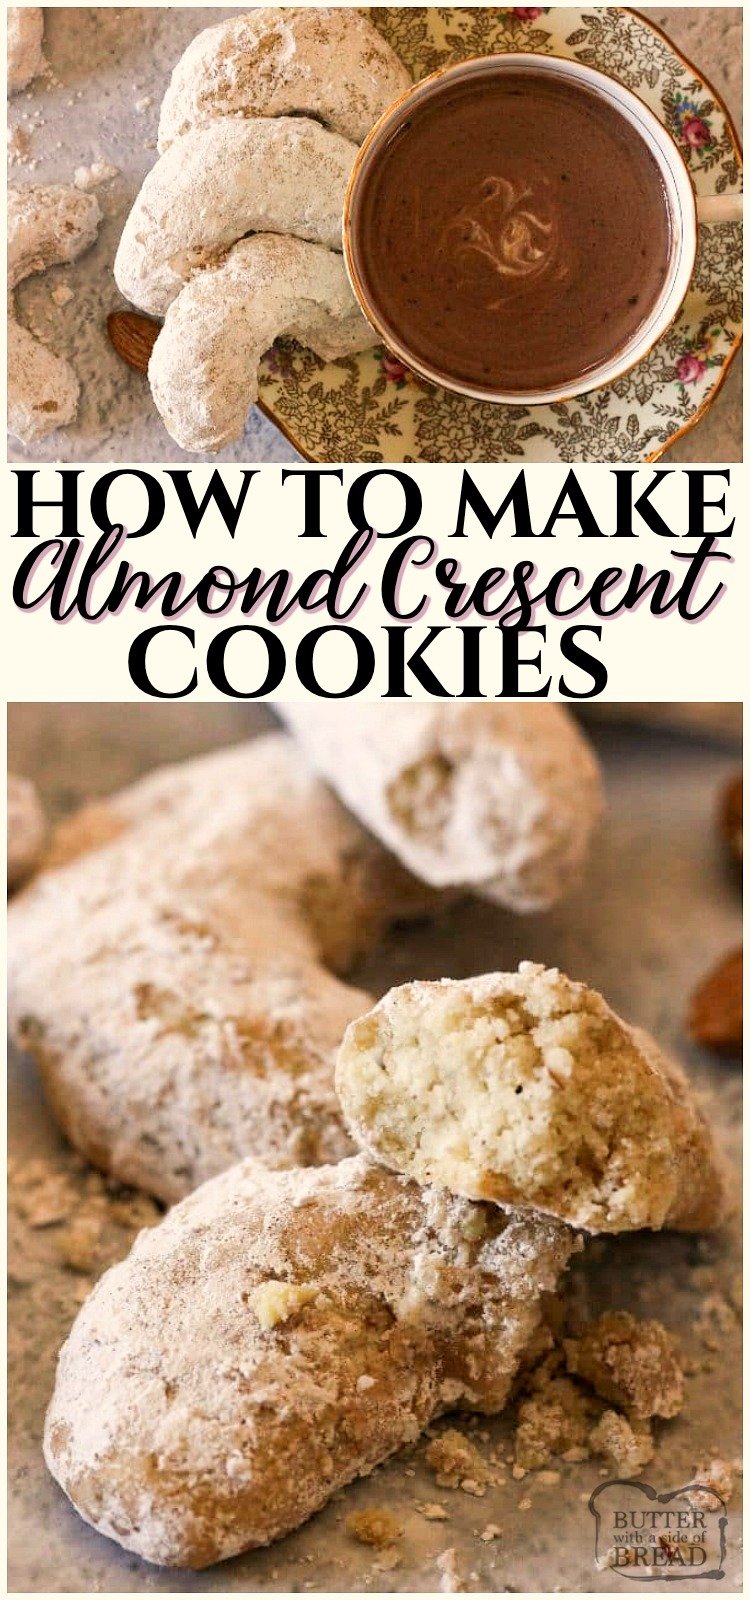 Almond Crescent Cookies are a Christmas favorite! Delicious shortbread cookies, filled with almonds & covered in powdered sugar. These are simple & elegant; perfect for cookie parties, neighbor gifts & dipping in hot cocoa.